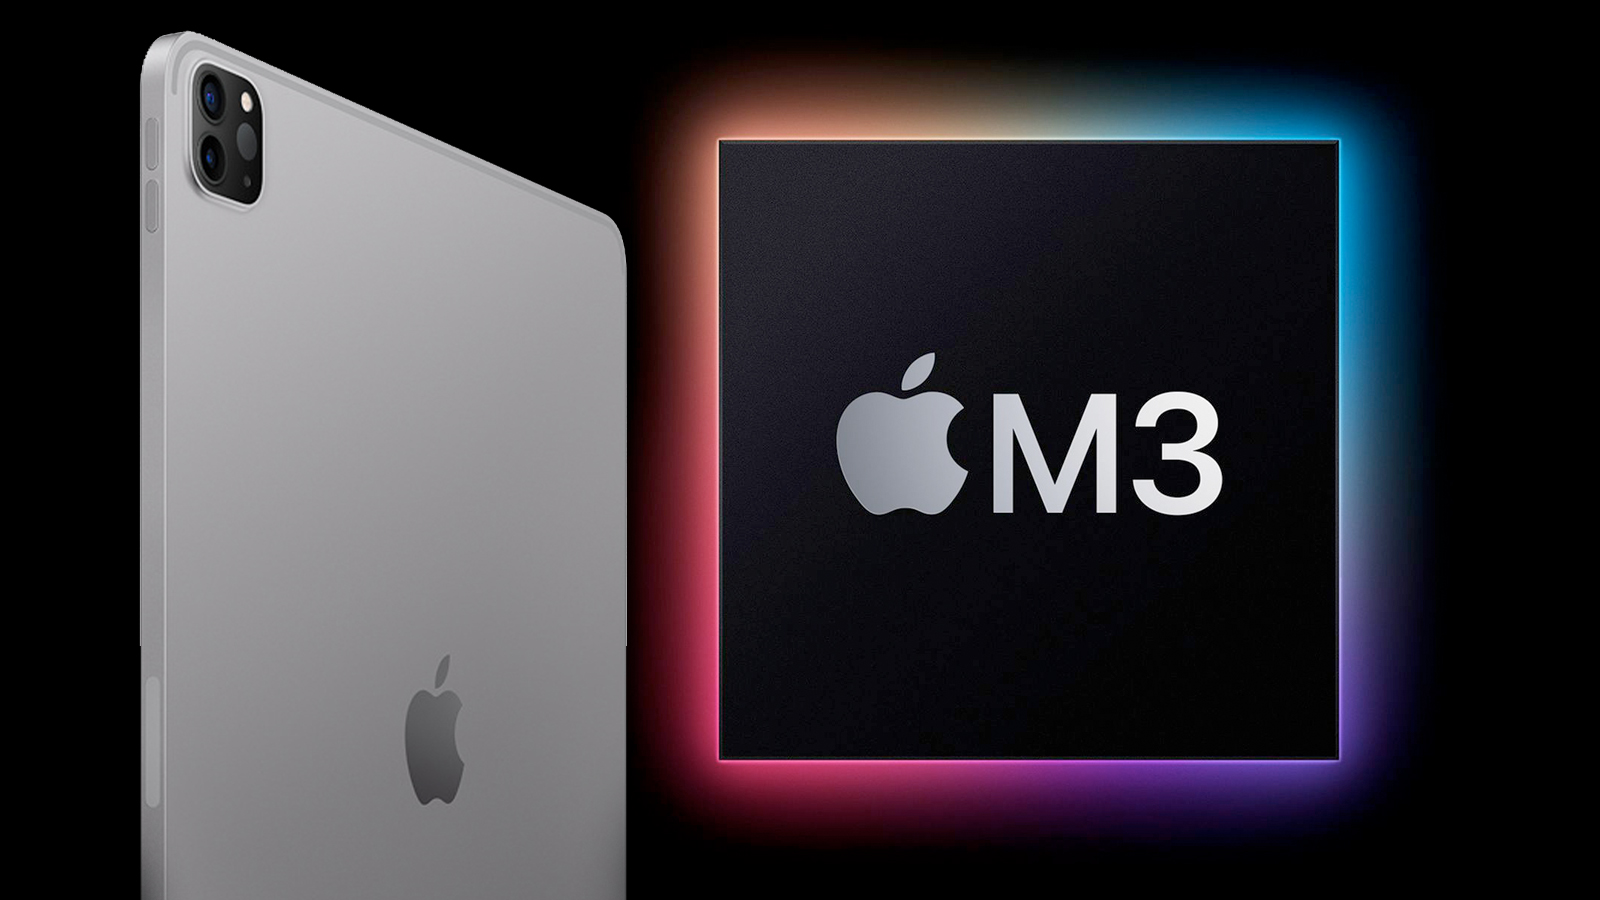 Next iPad Pro could skip straight to M3 Pro chip - Dexerto